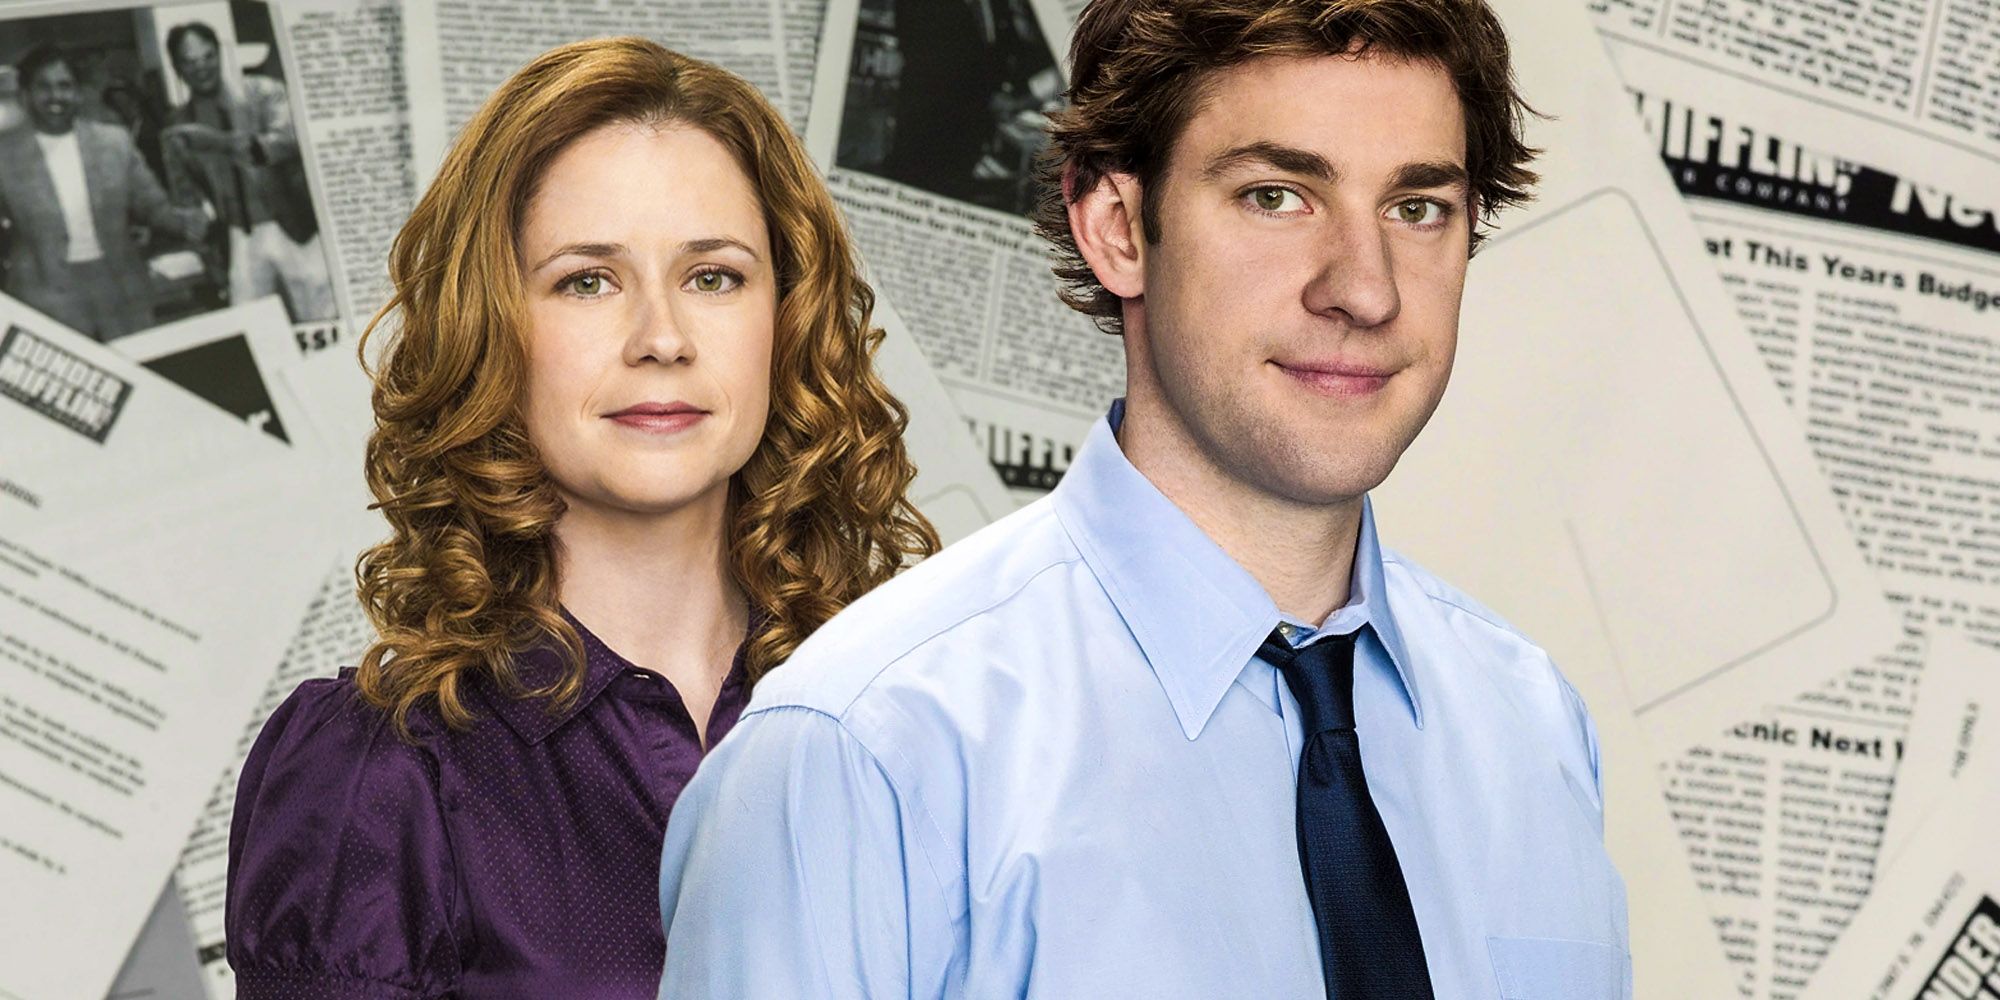 The Office: Pam's Slow Transformation Over The Years (In Pictures)